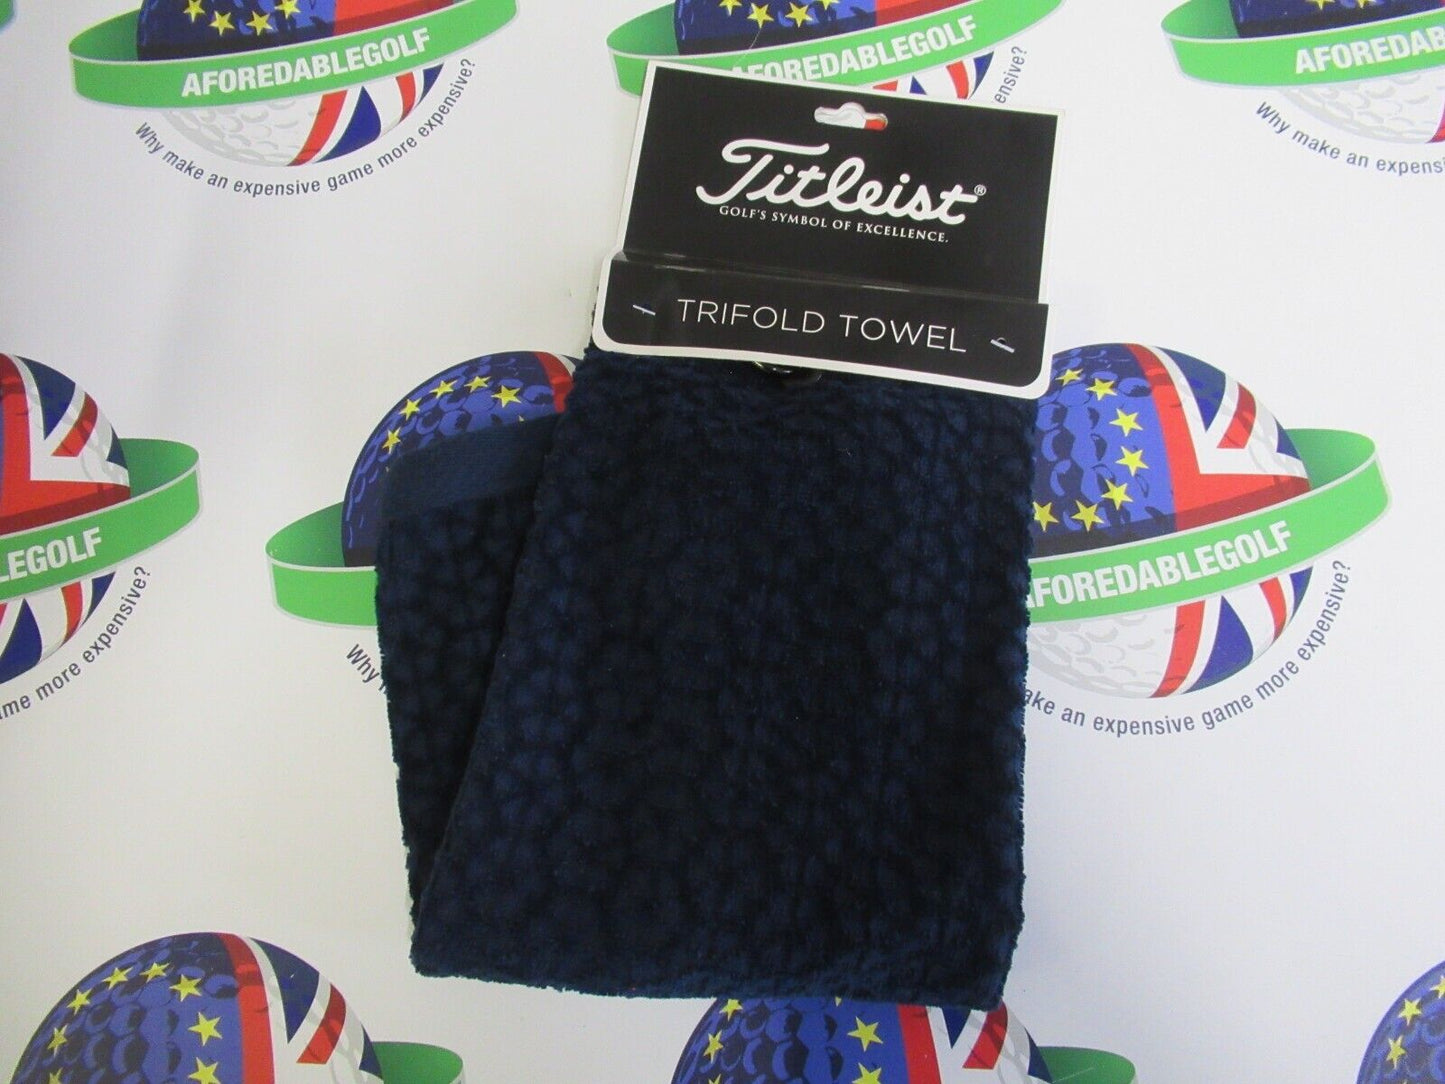 new titleist trifold towel navy/blue 100% cotton 16" x 16" full loop terry